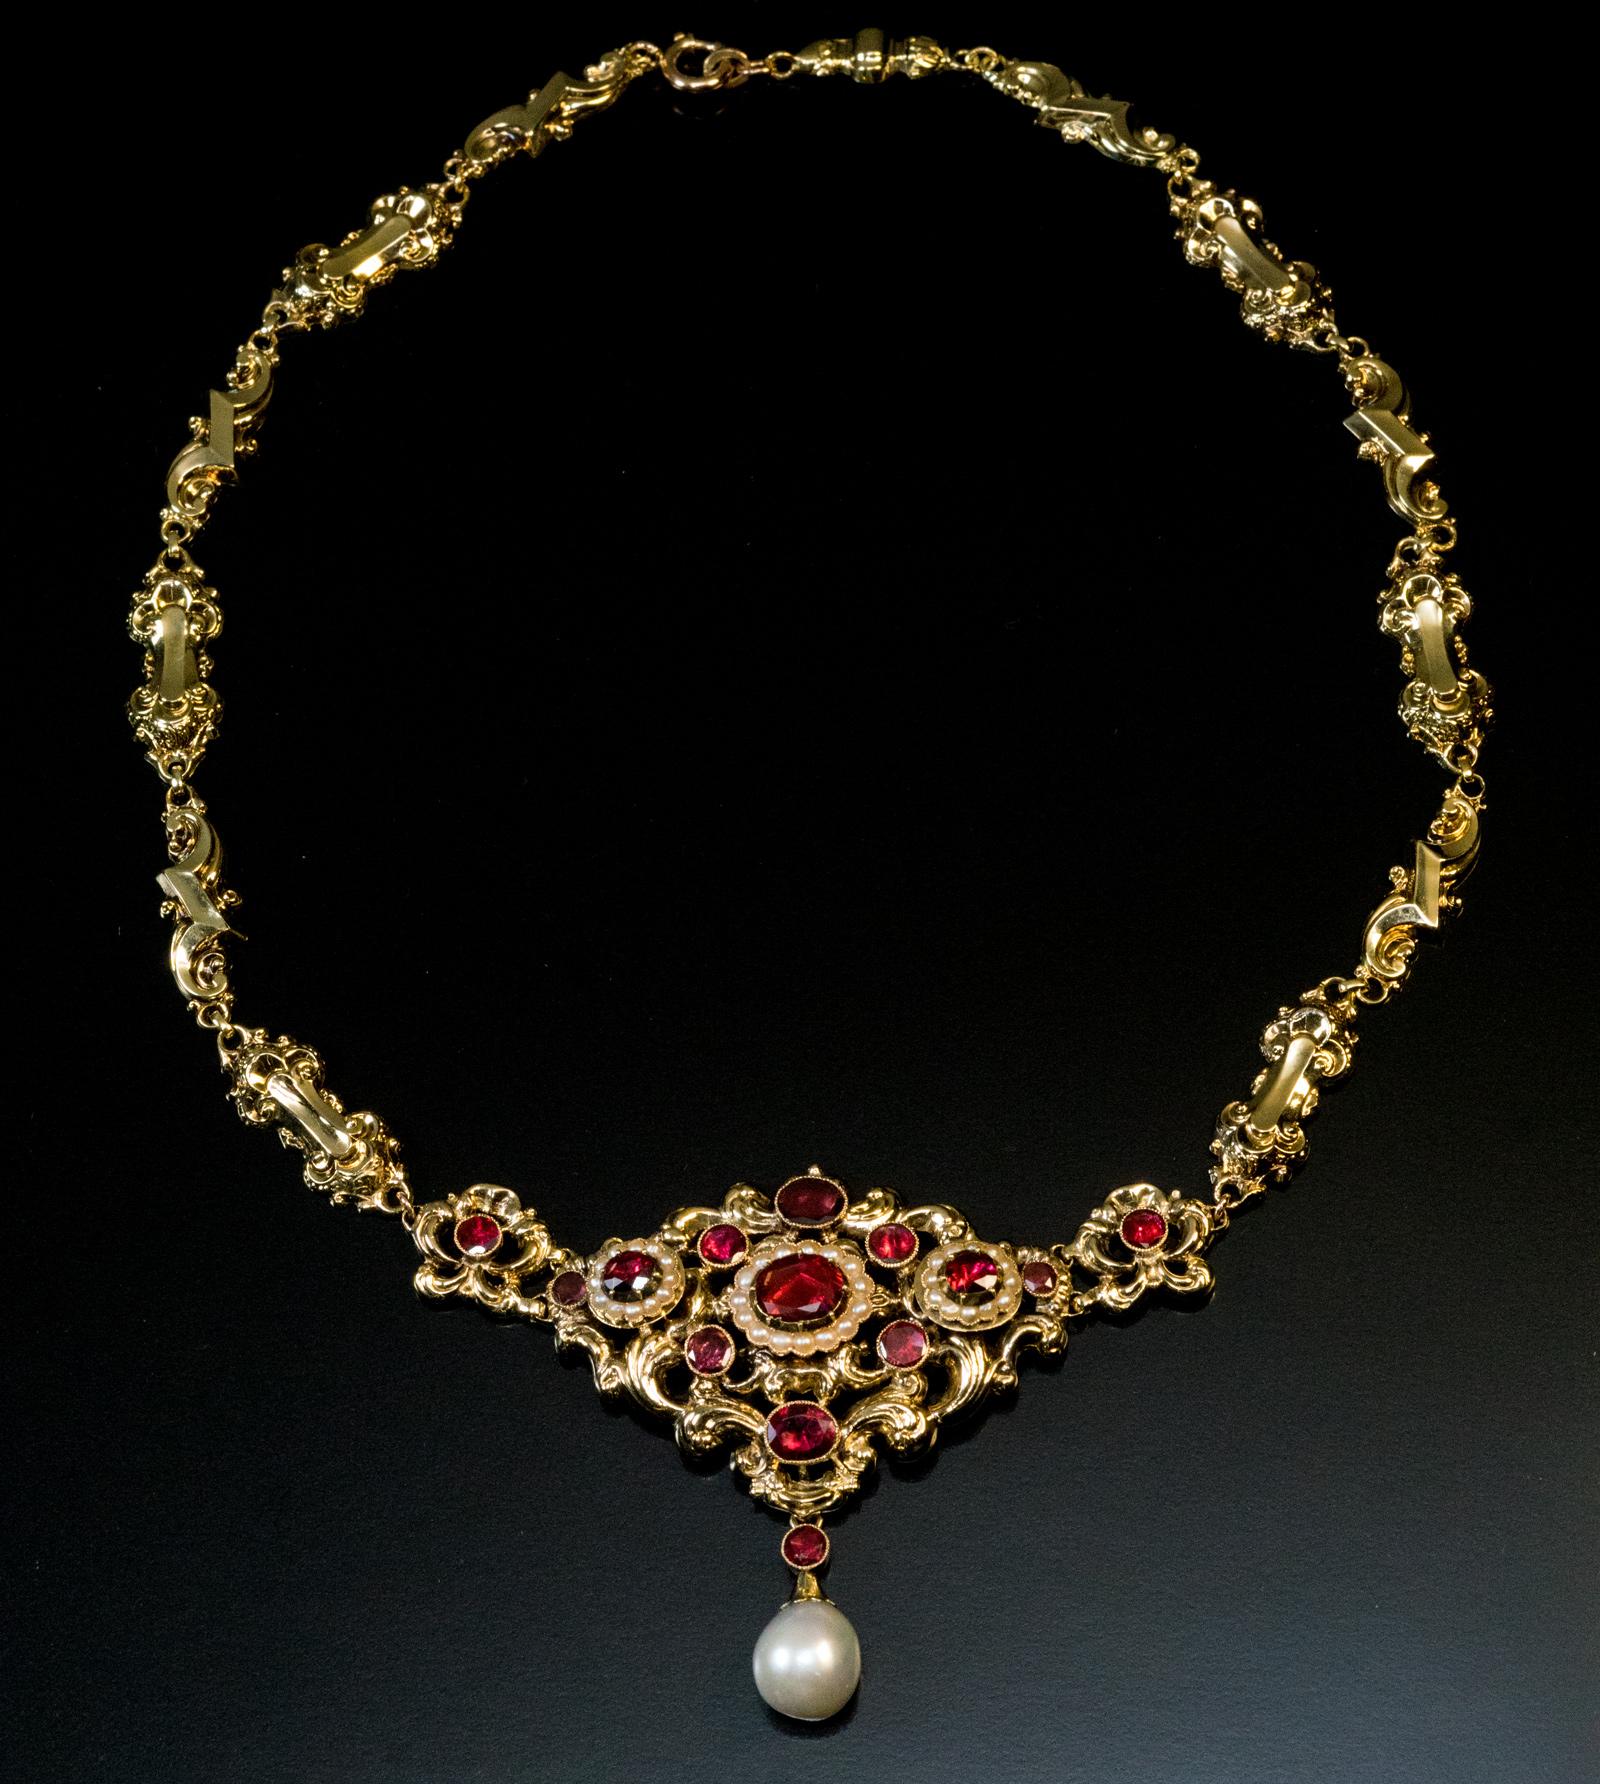 Antique Renaissance Revival Garnet Pearl Gold Necklace In Excellent Condition For Sale In Chicago, IL